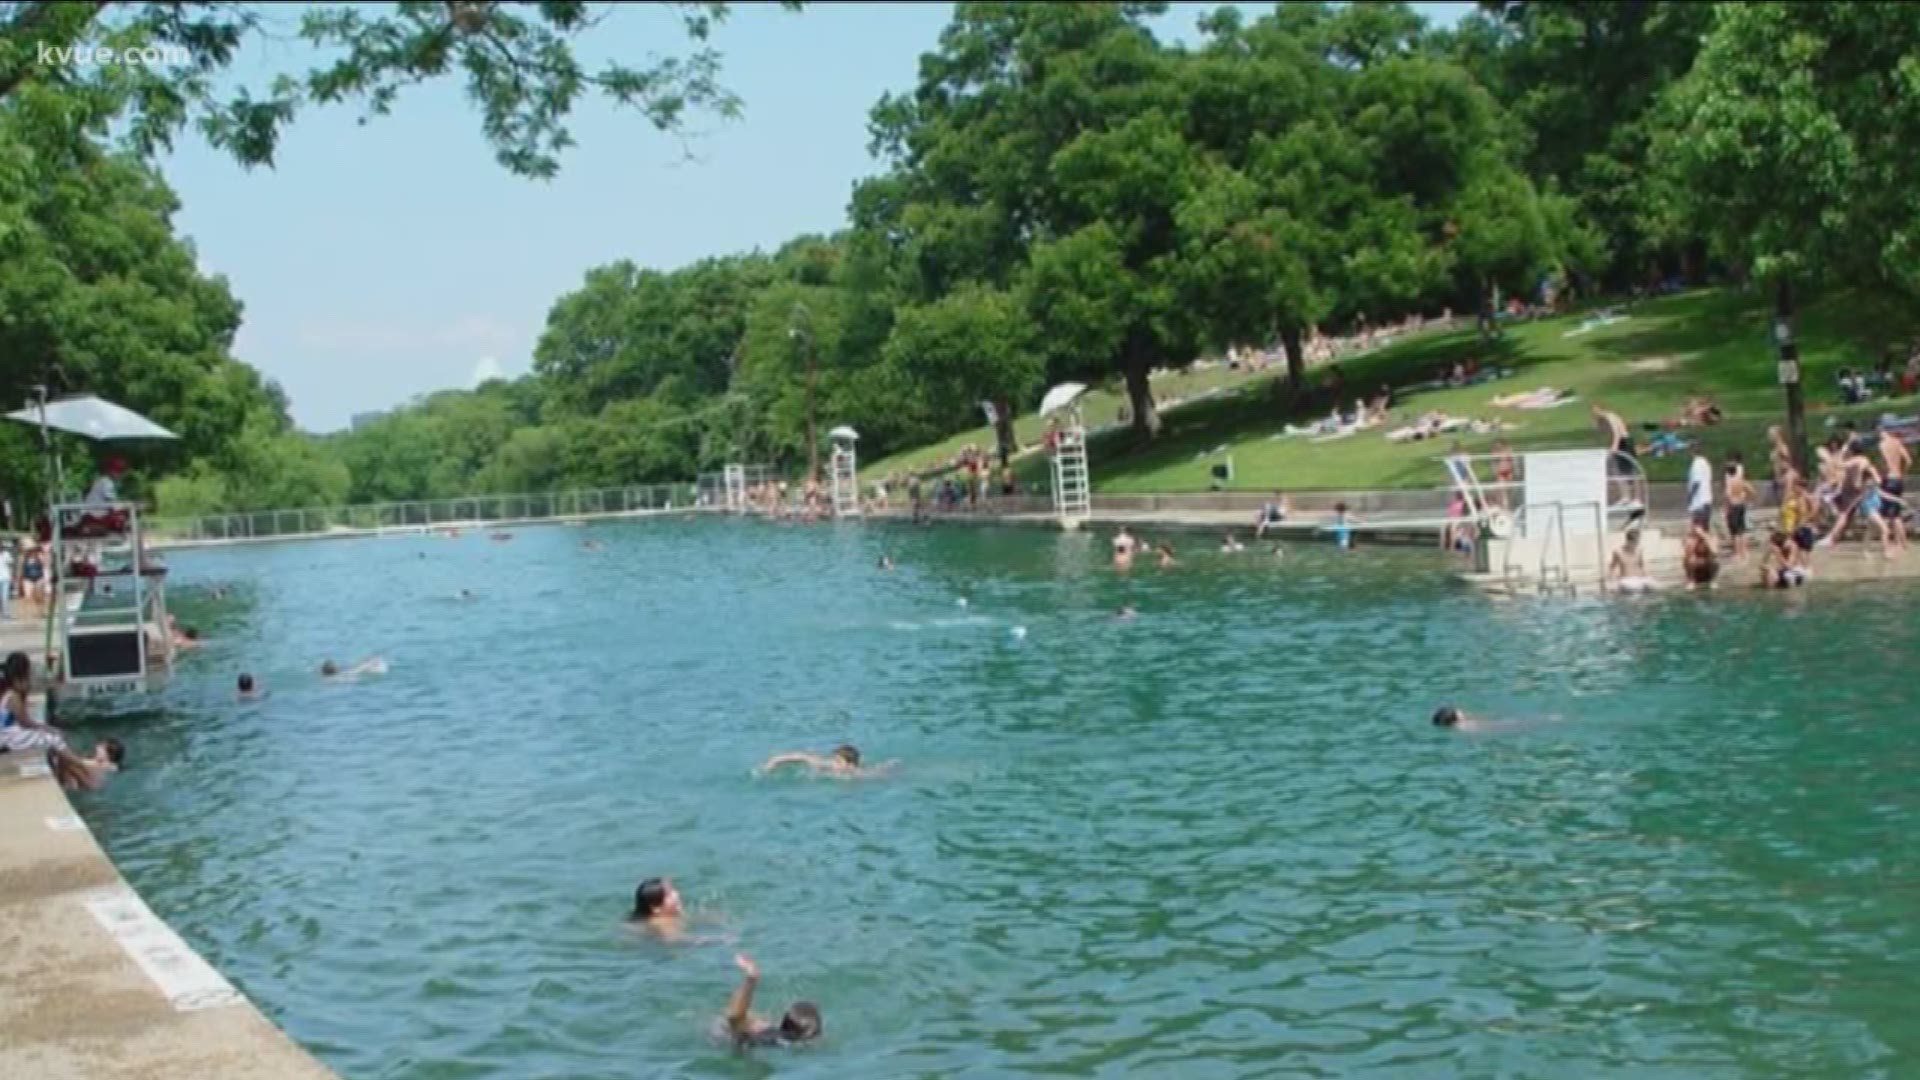 Officials are looking at what to do about the lack of parking spaces at one of Austin's favorite public spaces.